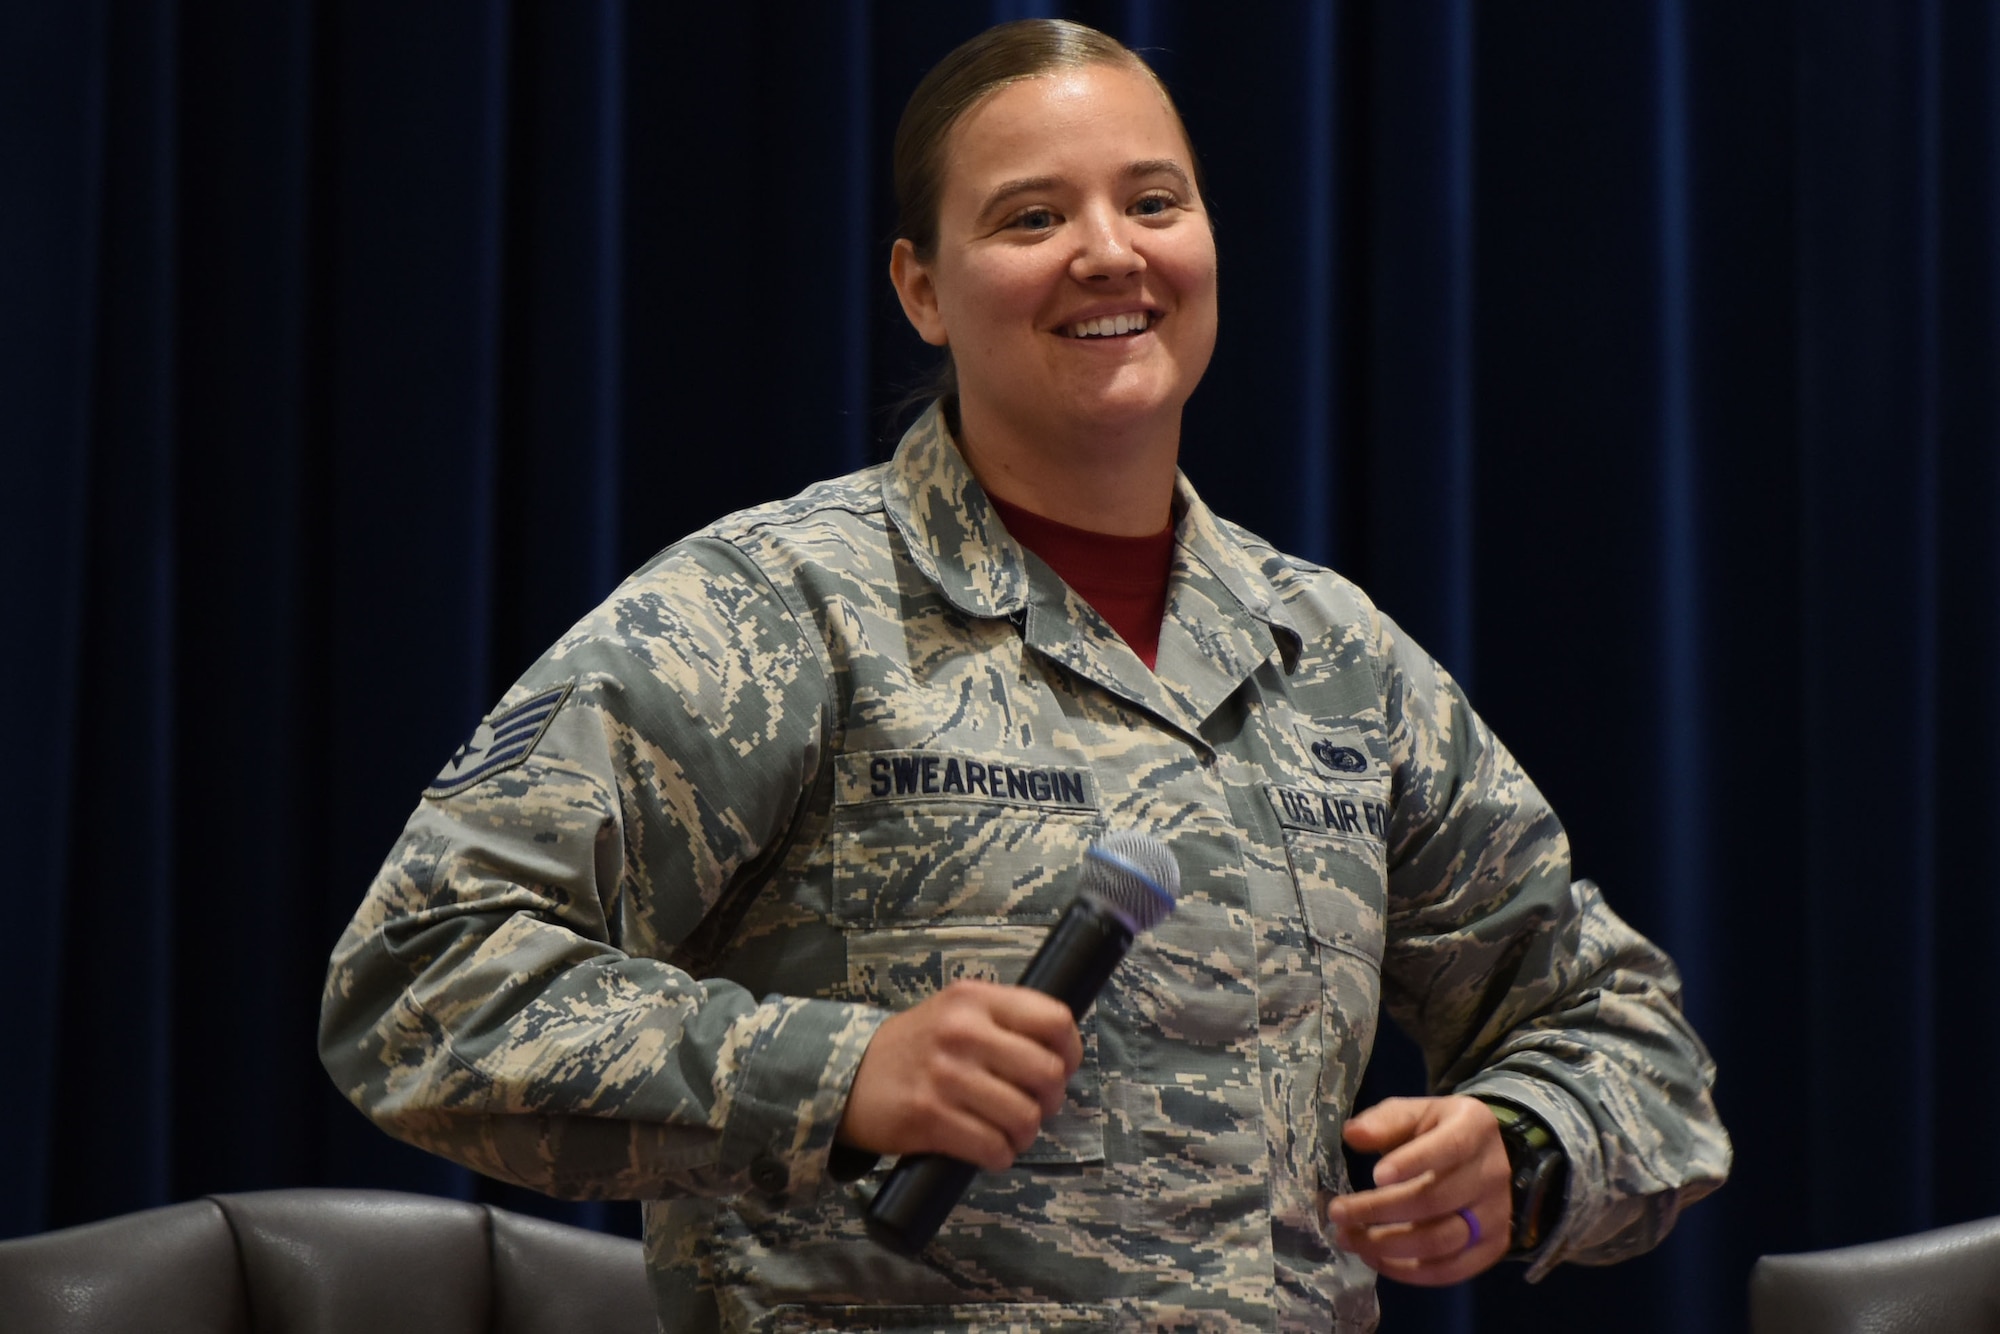 U.S. Air Force Staff Sgt. Amber Swearengin, 39th Air Base Wing Commander Support Staff NCO in charge, discusses topics relating to lesbian, gay, bisexual and transgender service members June 16, 2017, at Incirlik Air Base, Turkey. Swearengin participated in an LGBT Luncheon and shared her experiences on various topics, including her time in service before and after the Don’t Ask, Don’t Tell policy. (U.S. Air Force photo by Airman 1st Class Kristan Campbell) 